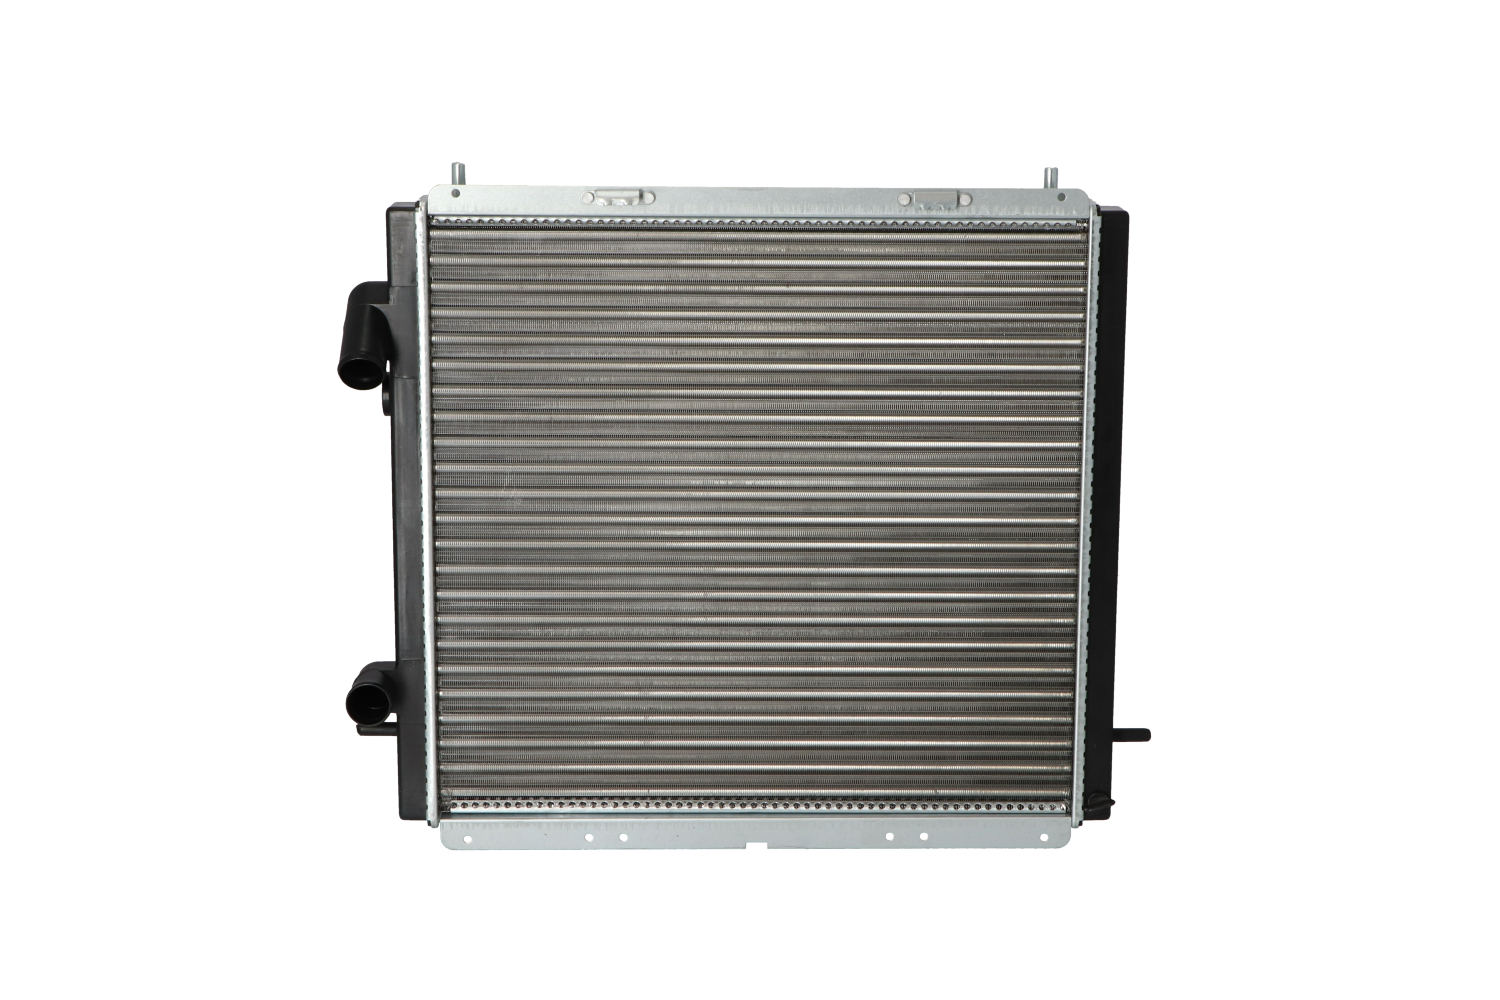 NRF 507359A Engine radiator Aluminium, 460 x 435 x 34 mm, Mechanically jointed cooling fins